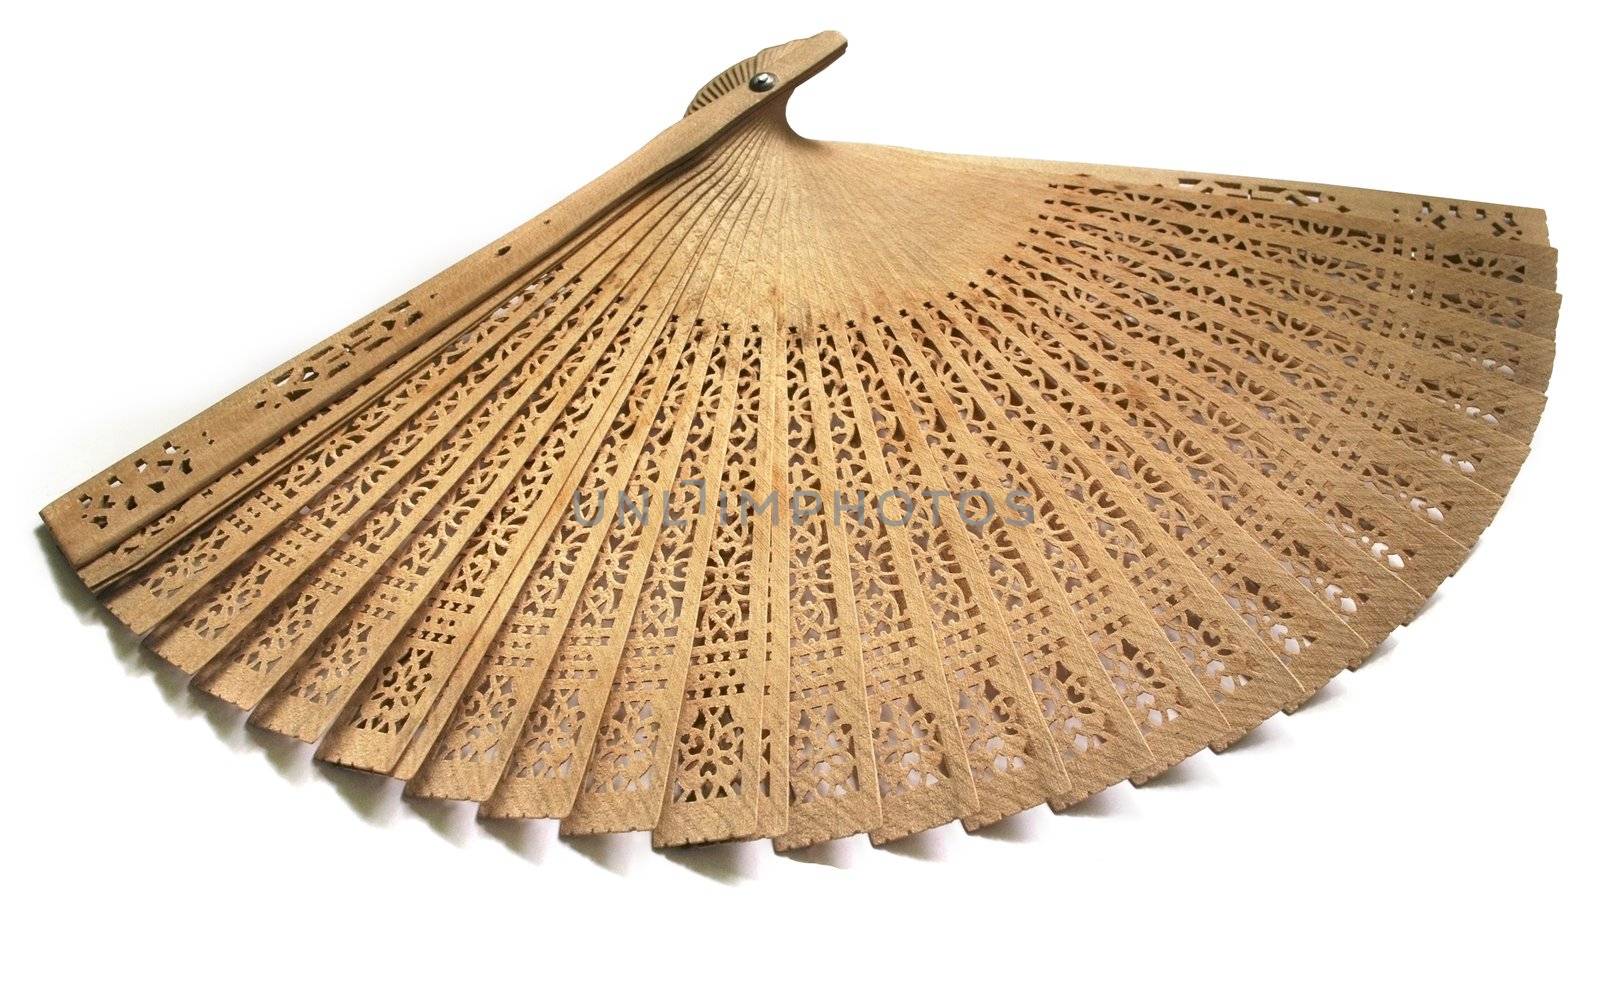 the carved wooden fan on the white background